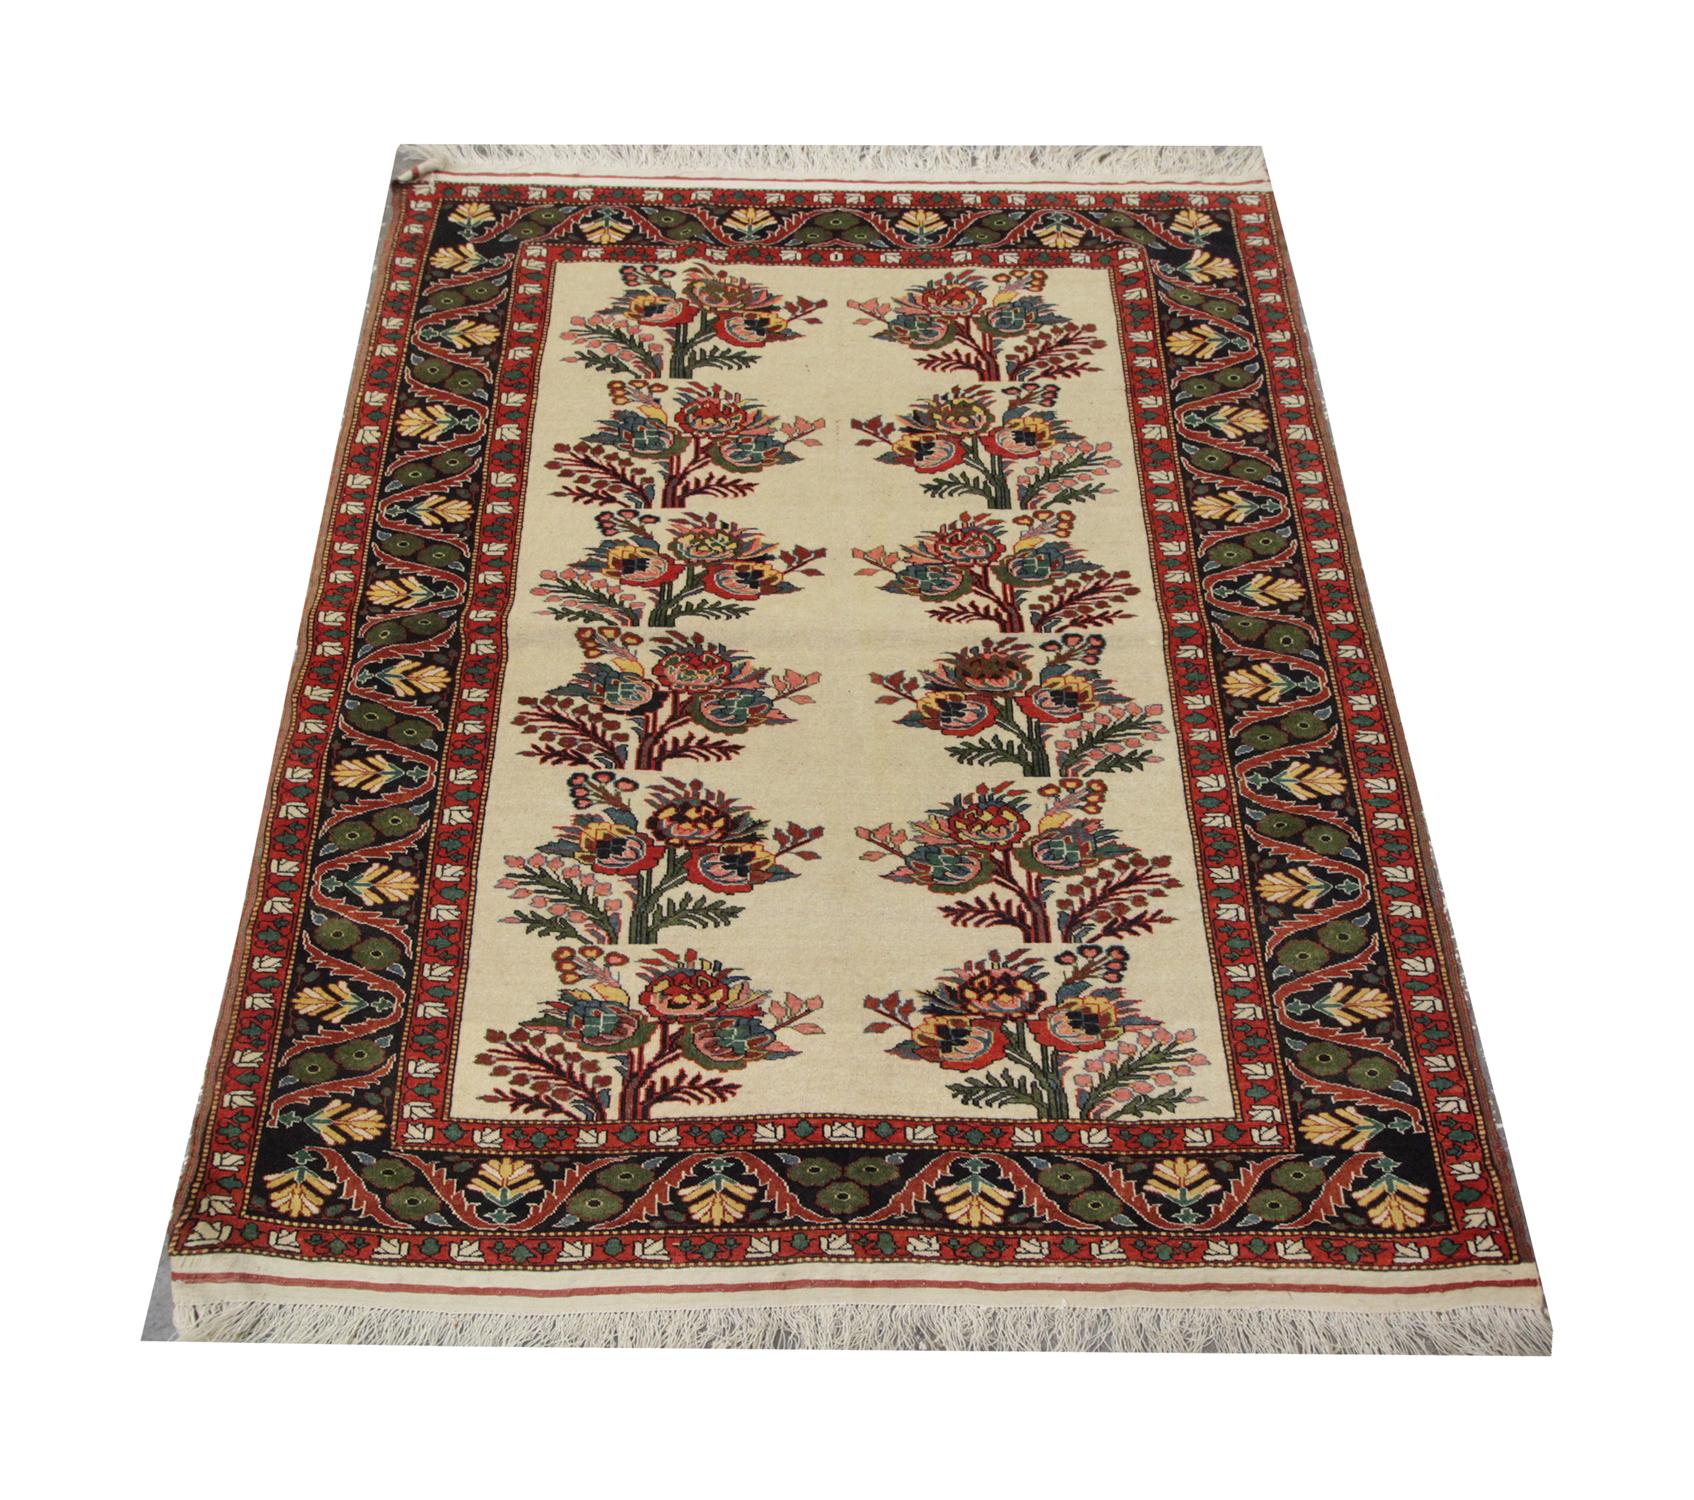 This luxurious realistic repeat pattern design rug was woven in Azerbaijan. It features 12 detailed botanical bouquets in rich pink-red and cream colors on a subtle beige background. The vibrant layered repeat pattern border encloses this design and